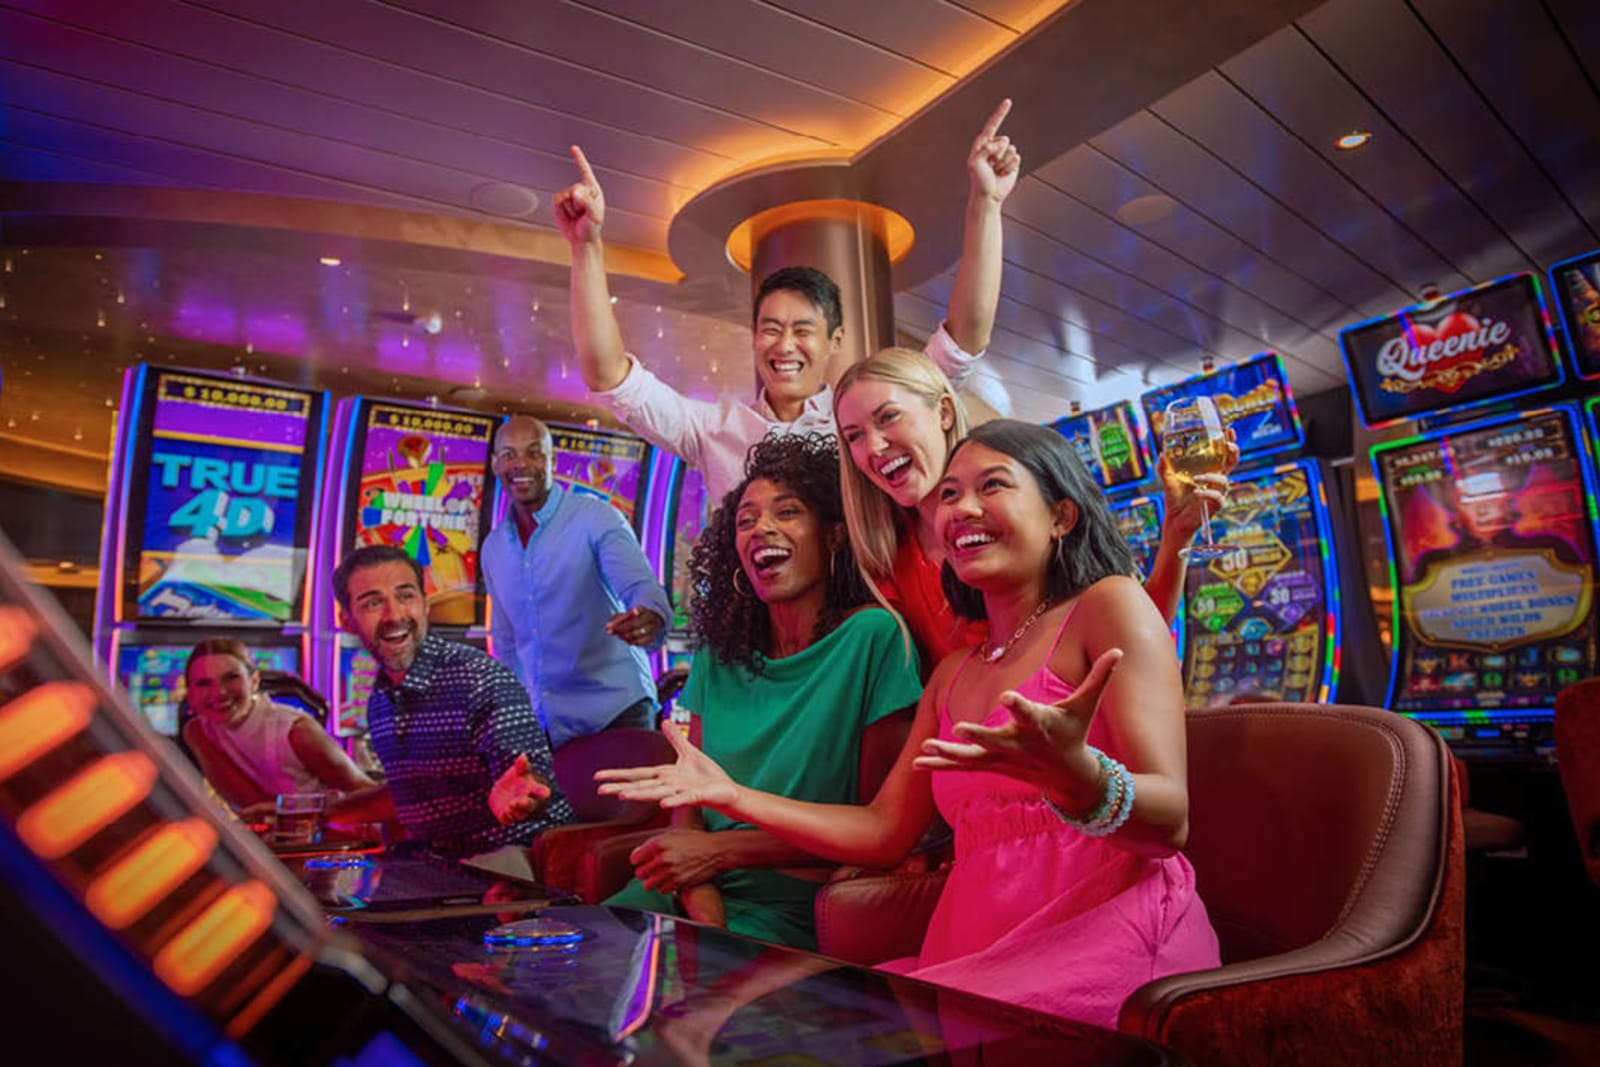 A group of friends at the casino on board a cruise ship